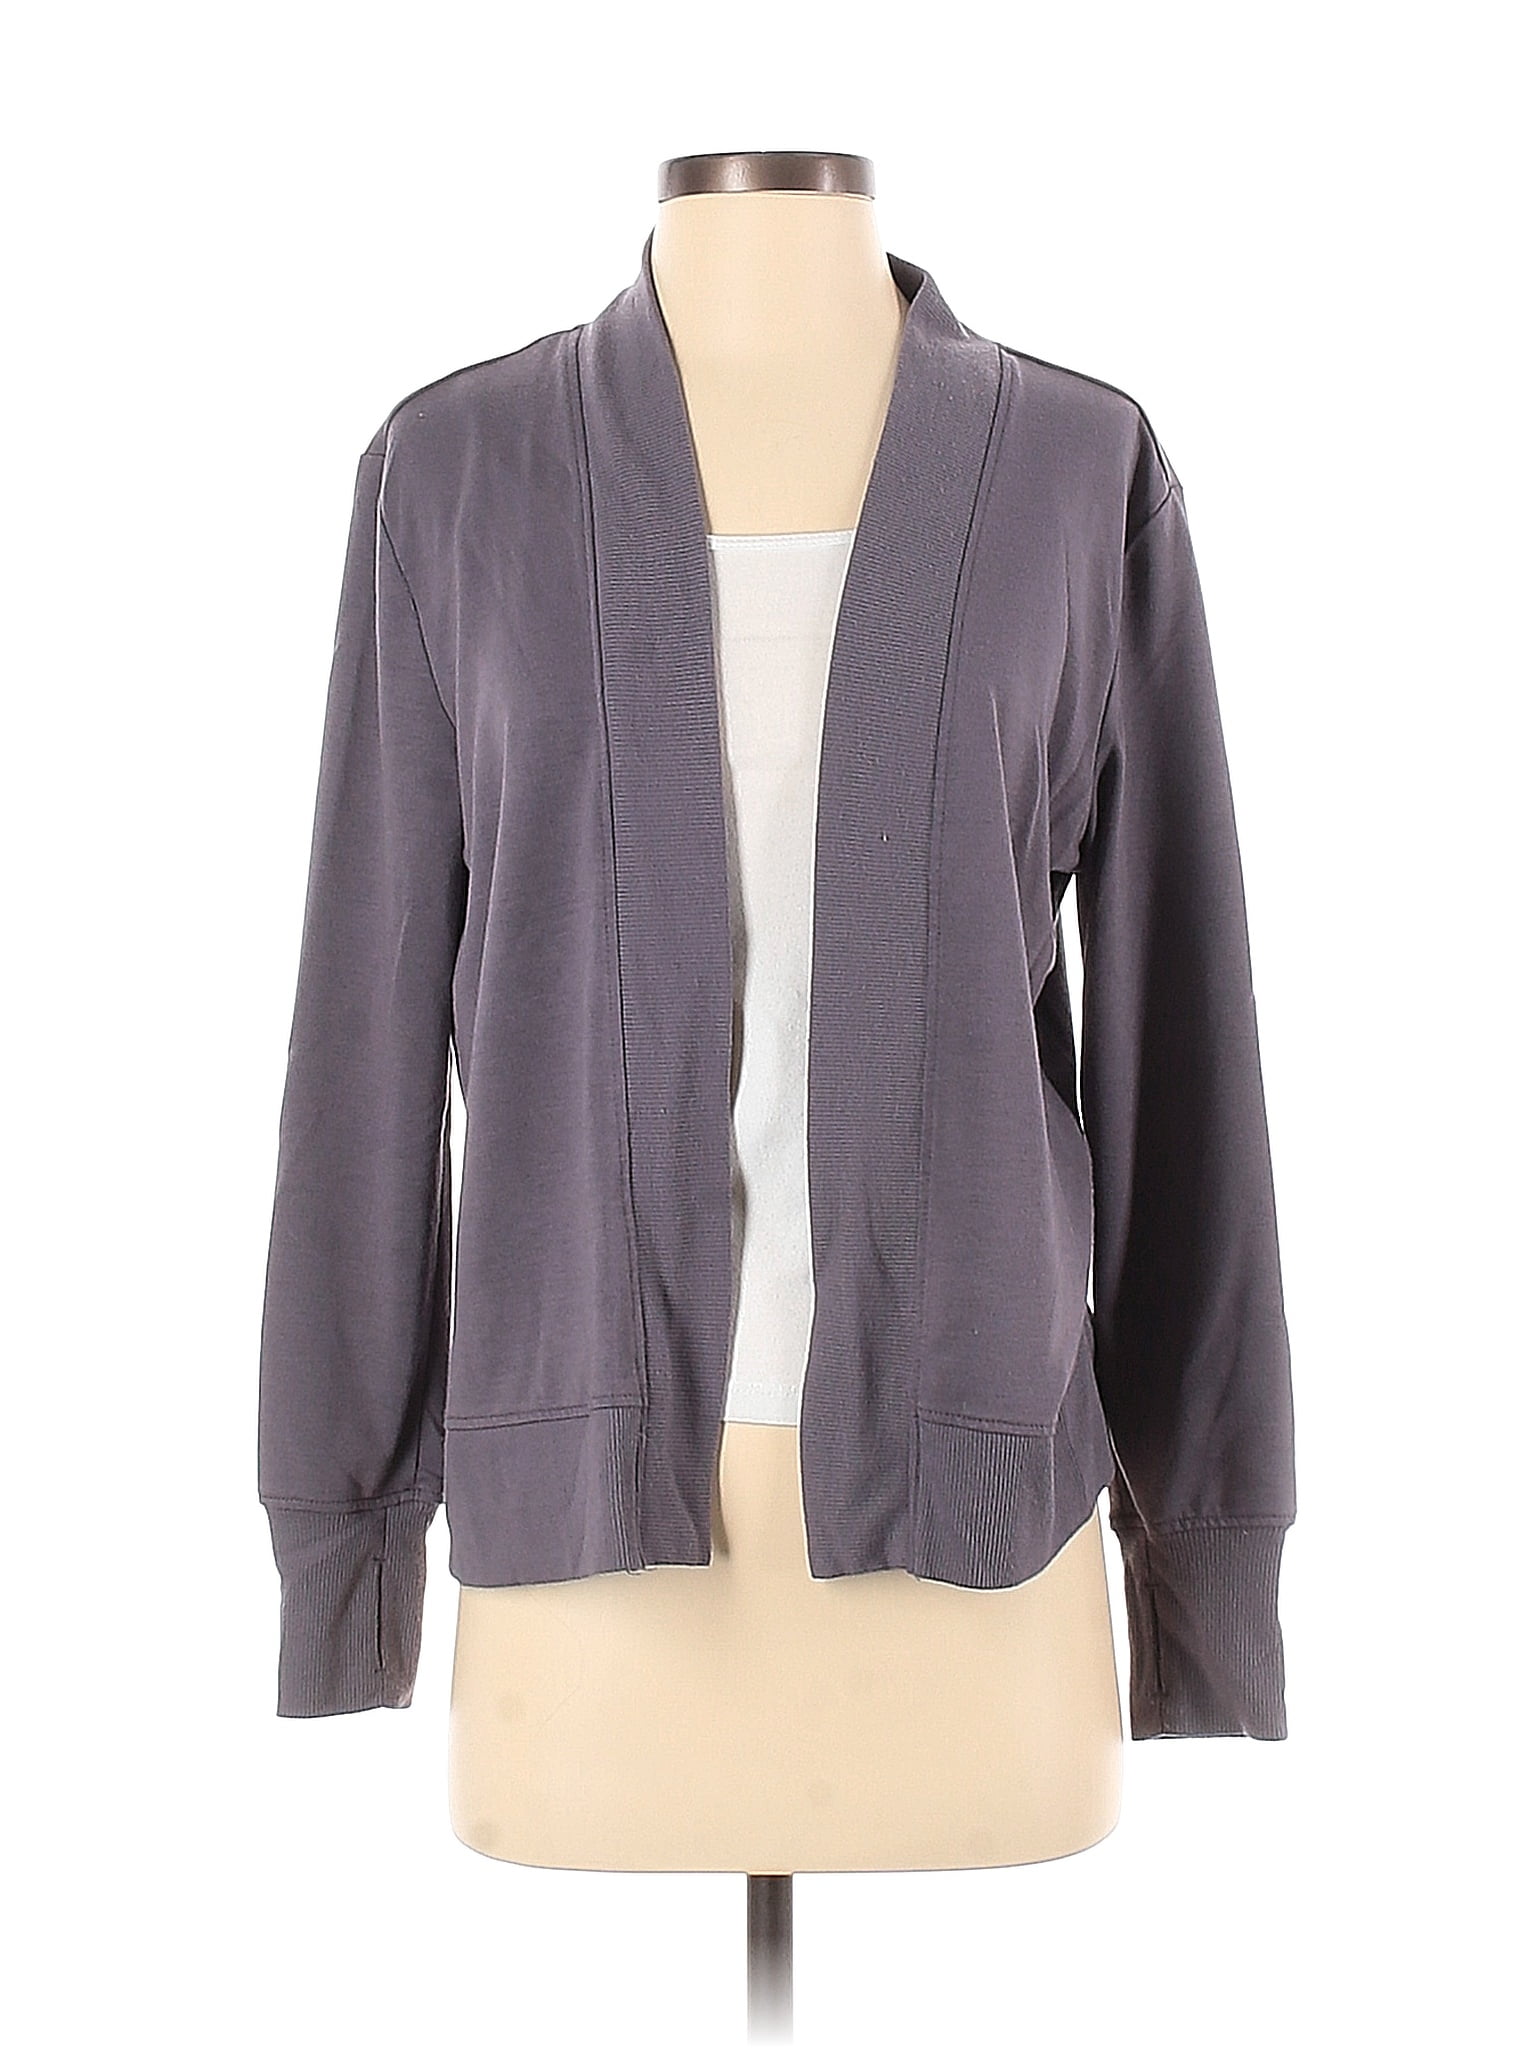 Apana Women's Cardigan Sweaters On Sale Up To 90% Off Retail